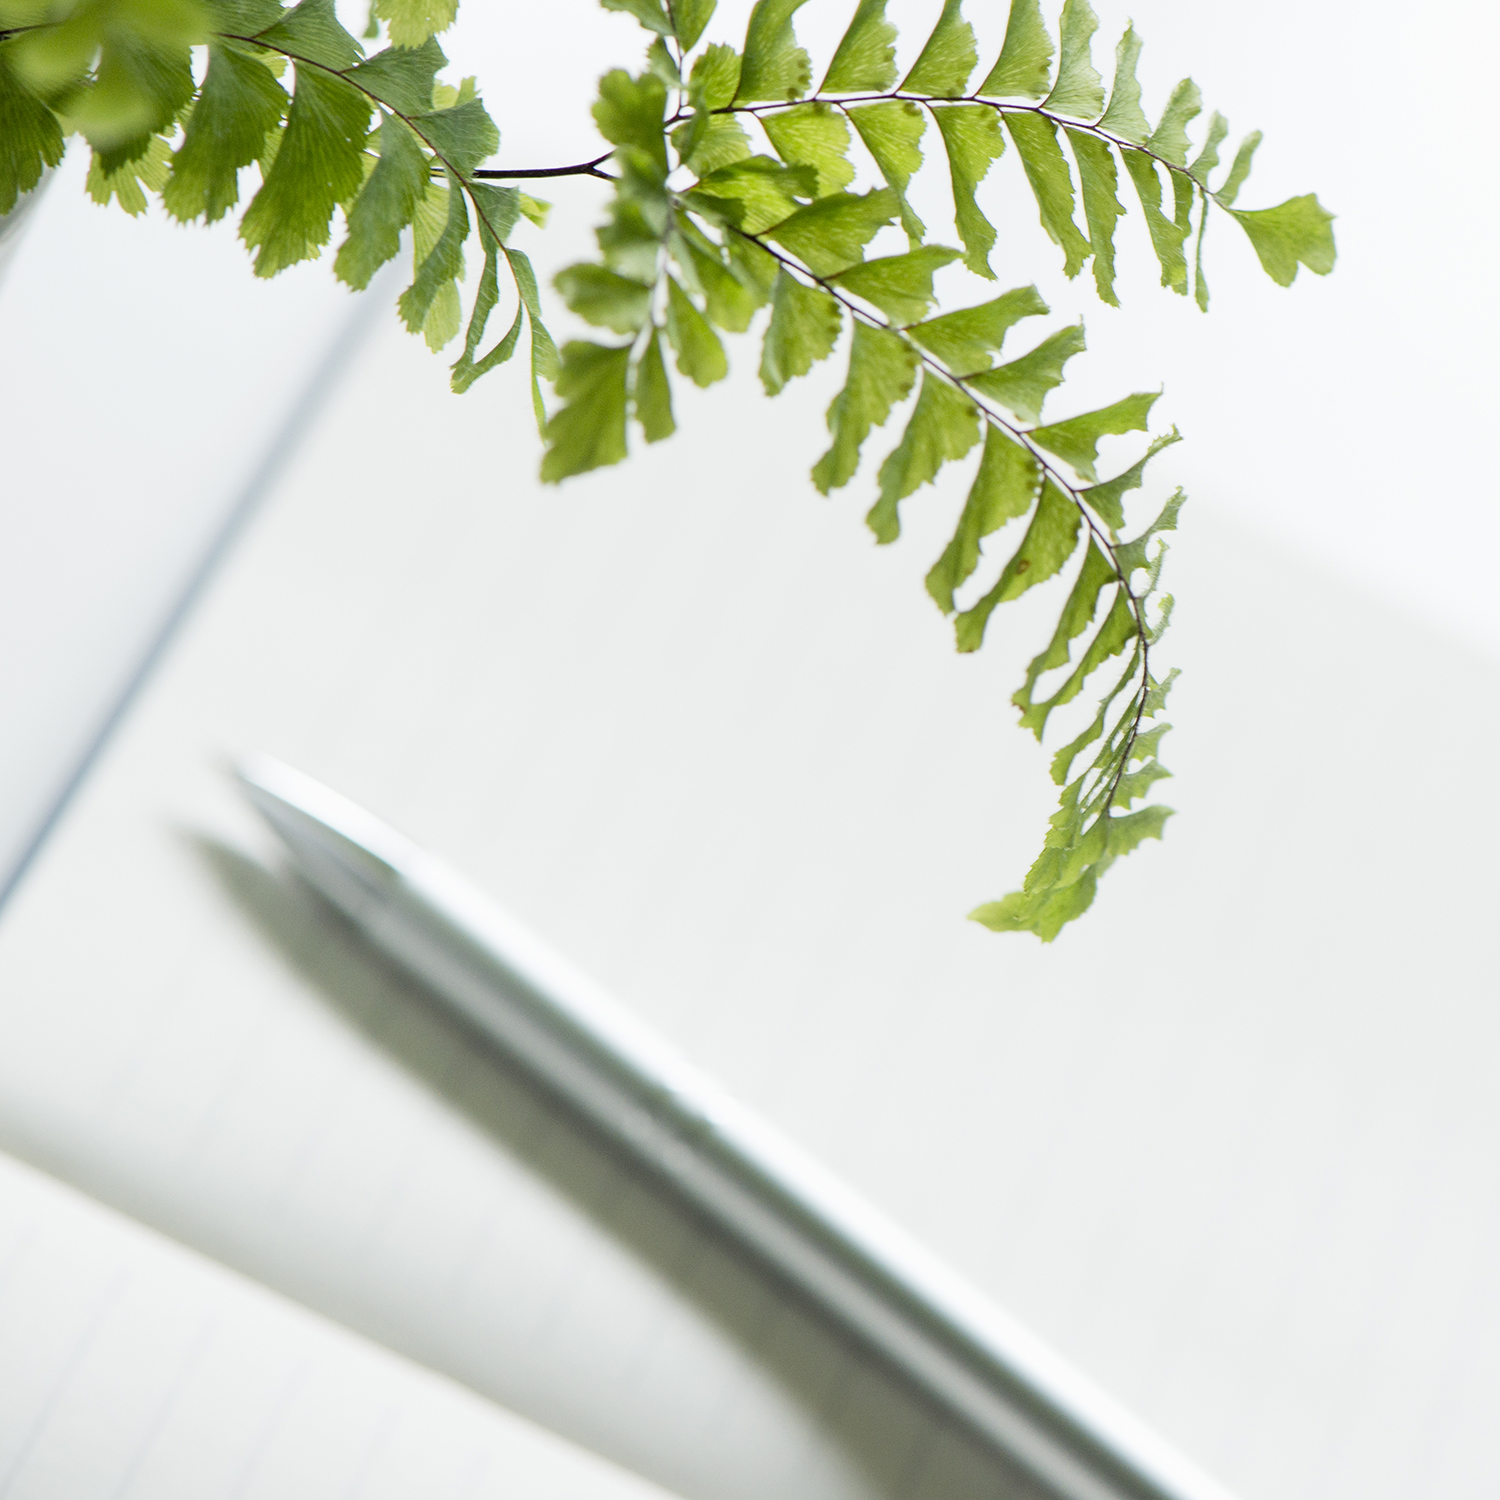 Fern plant, notebook and pen displayed on white table ready for a coaching session